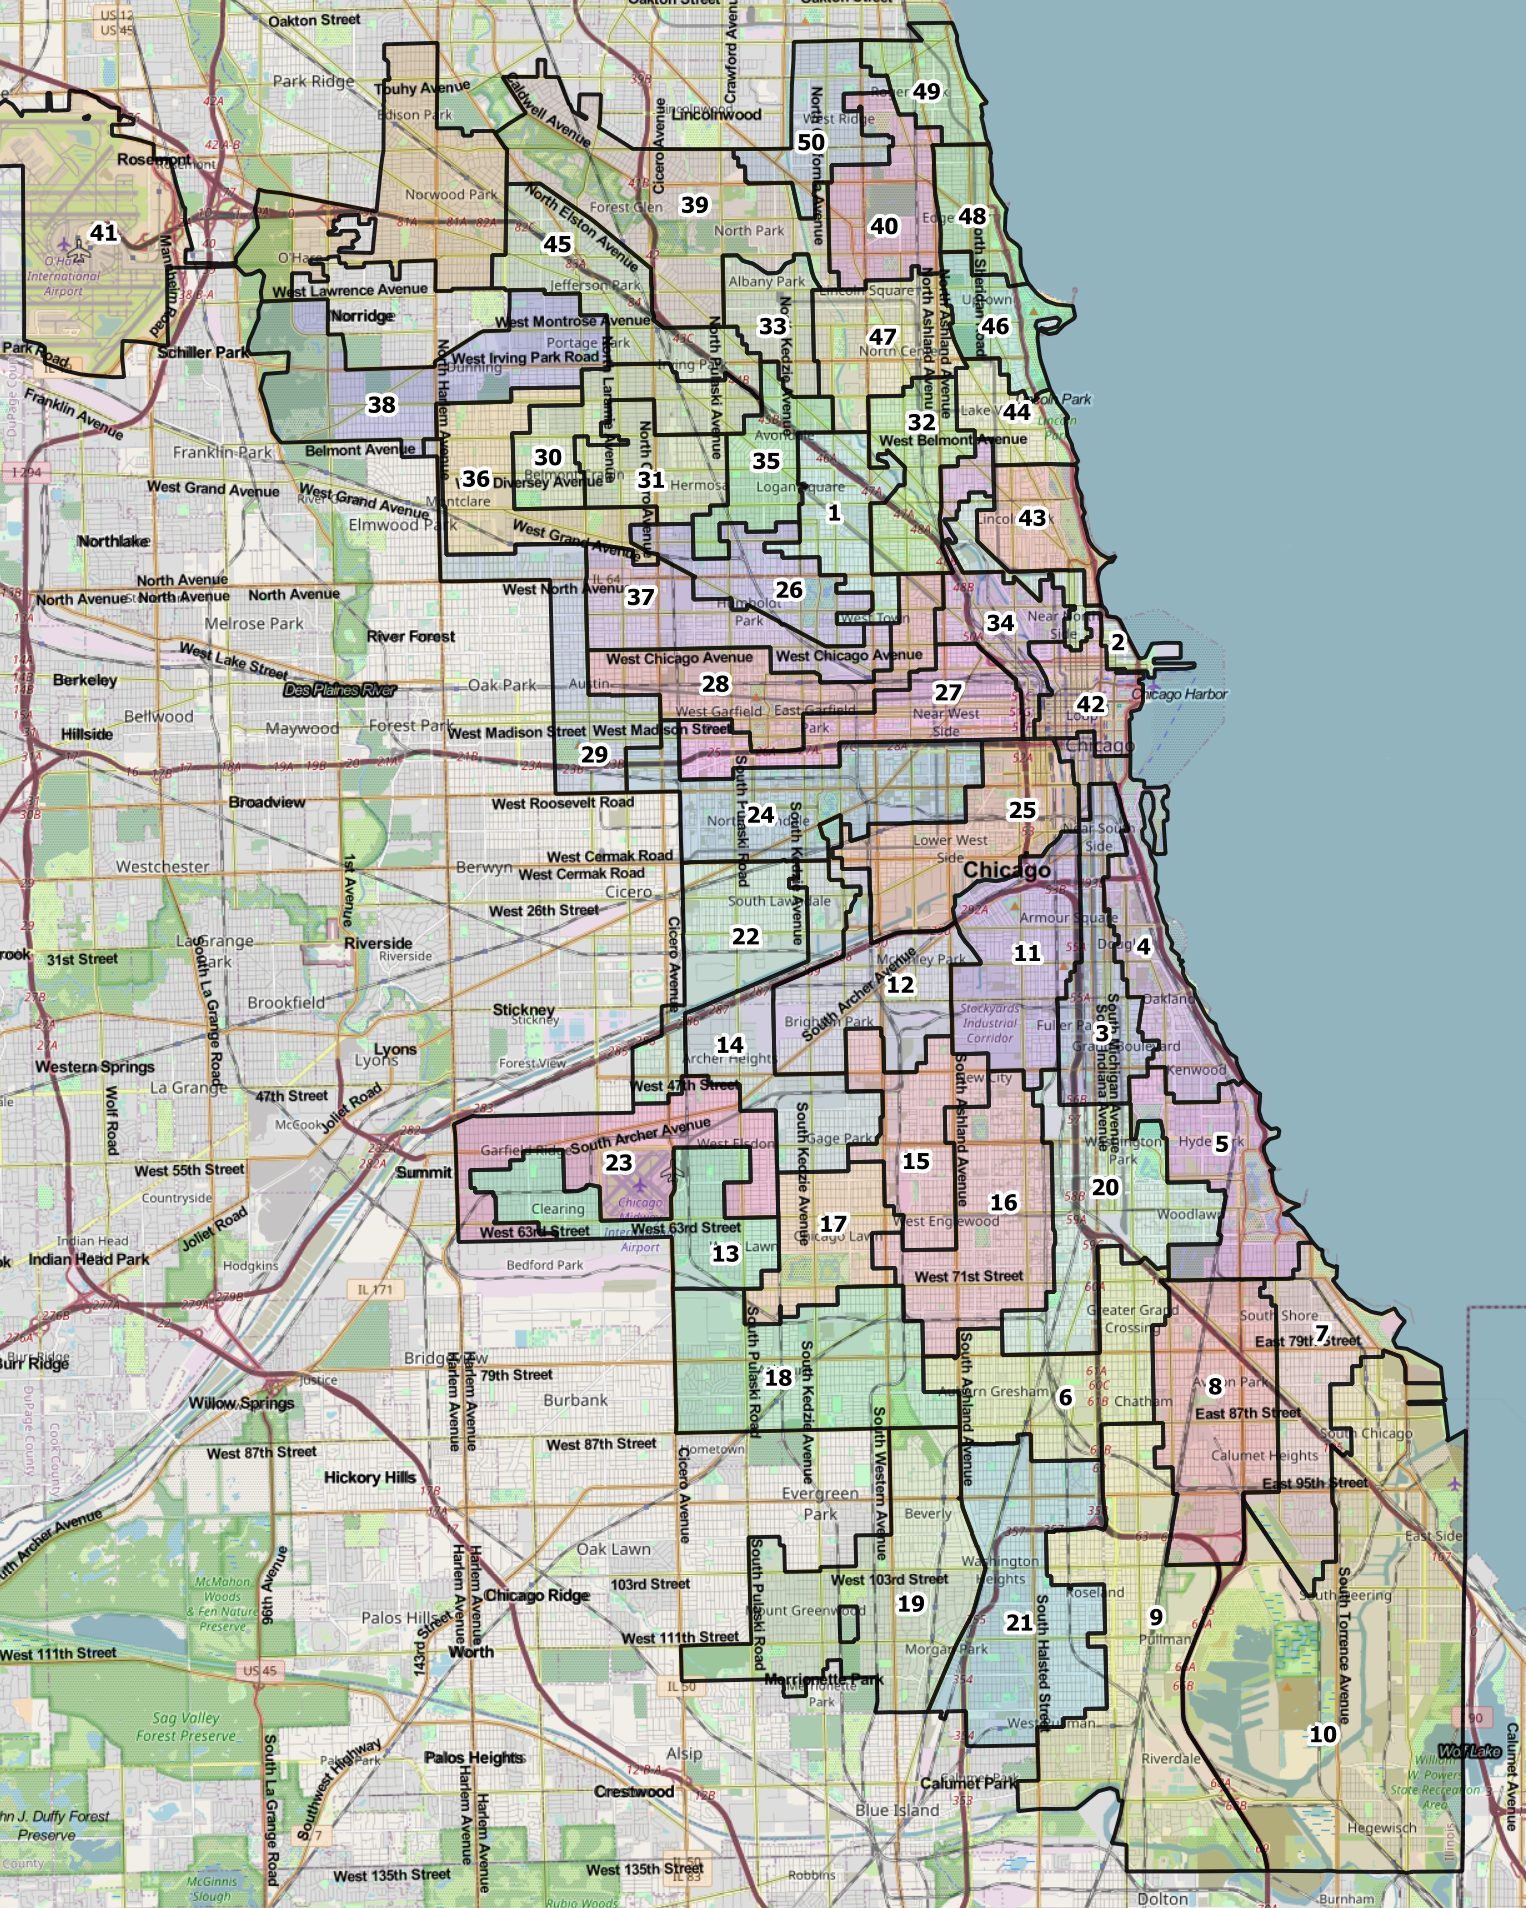 The Chicago City Council’s Latino Caucus offered this version of a new city ward map, which would add two Latino-majority wards to reflect population growth. Despite a drop in the number of African Americans living in Chicago, the council’s Black Caucus is trying to hold what it has.